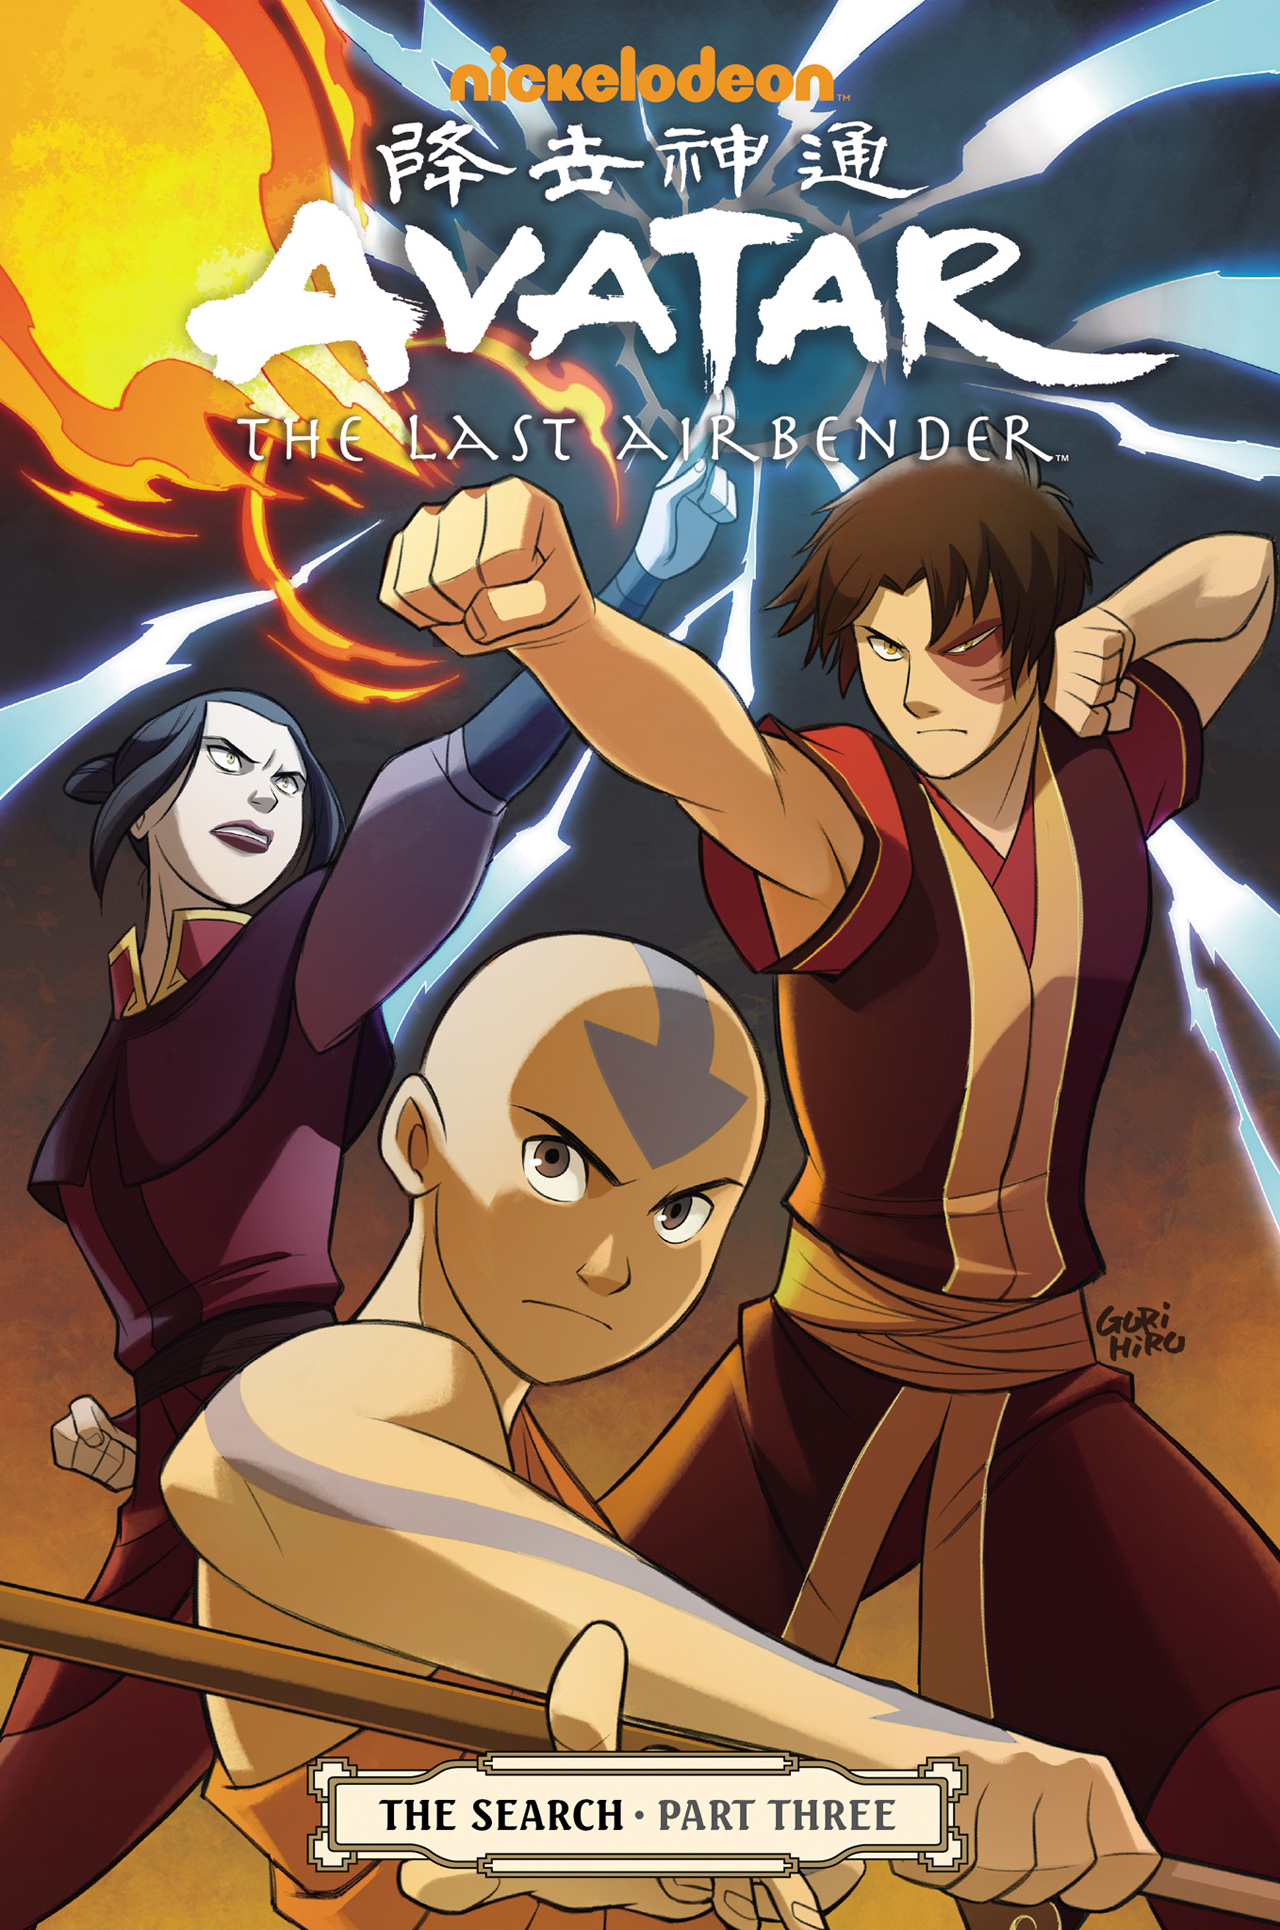 Read online Nickelodeon Avatar: The Last Airbender - The Search comic -  Issue # Part 3 - 1